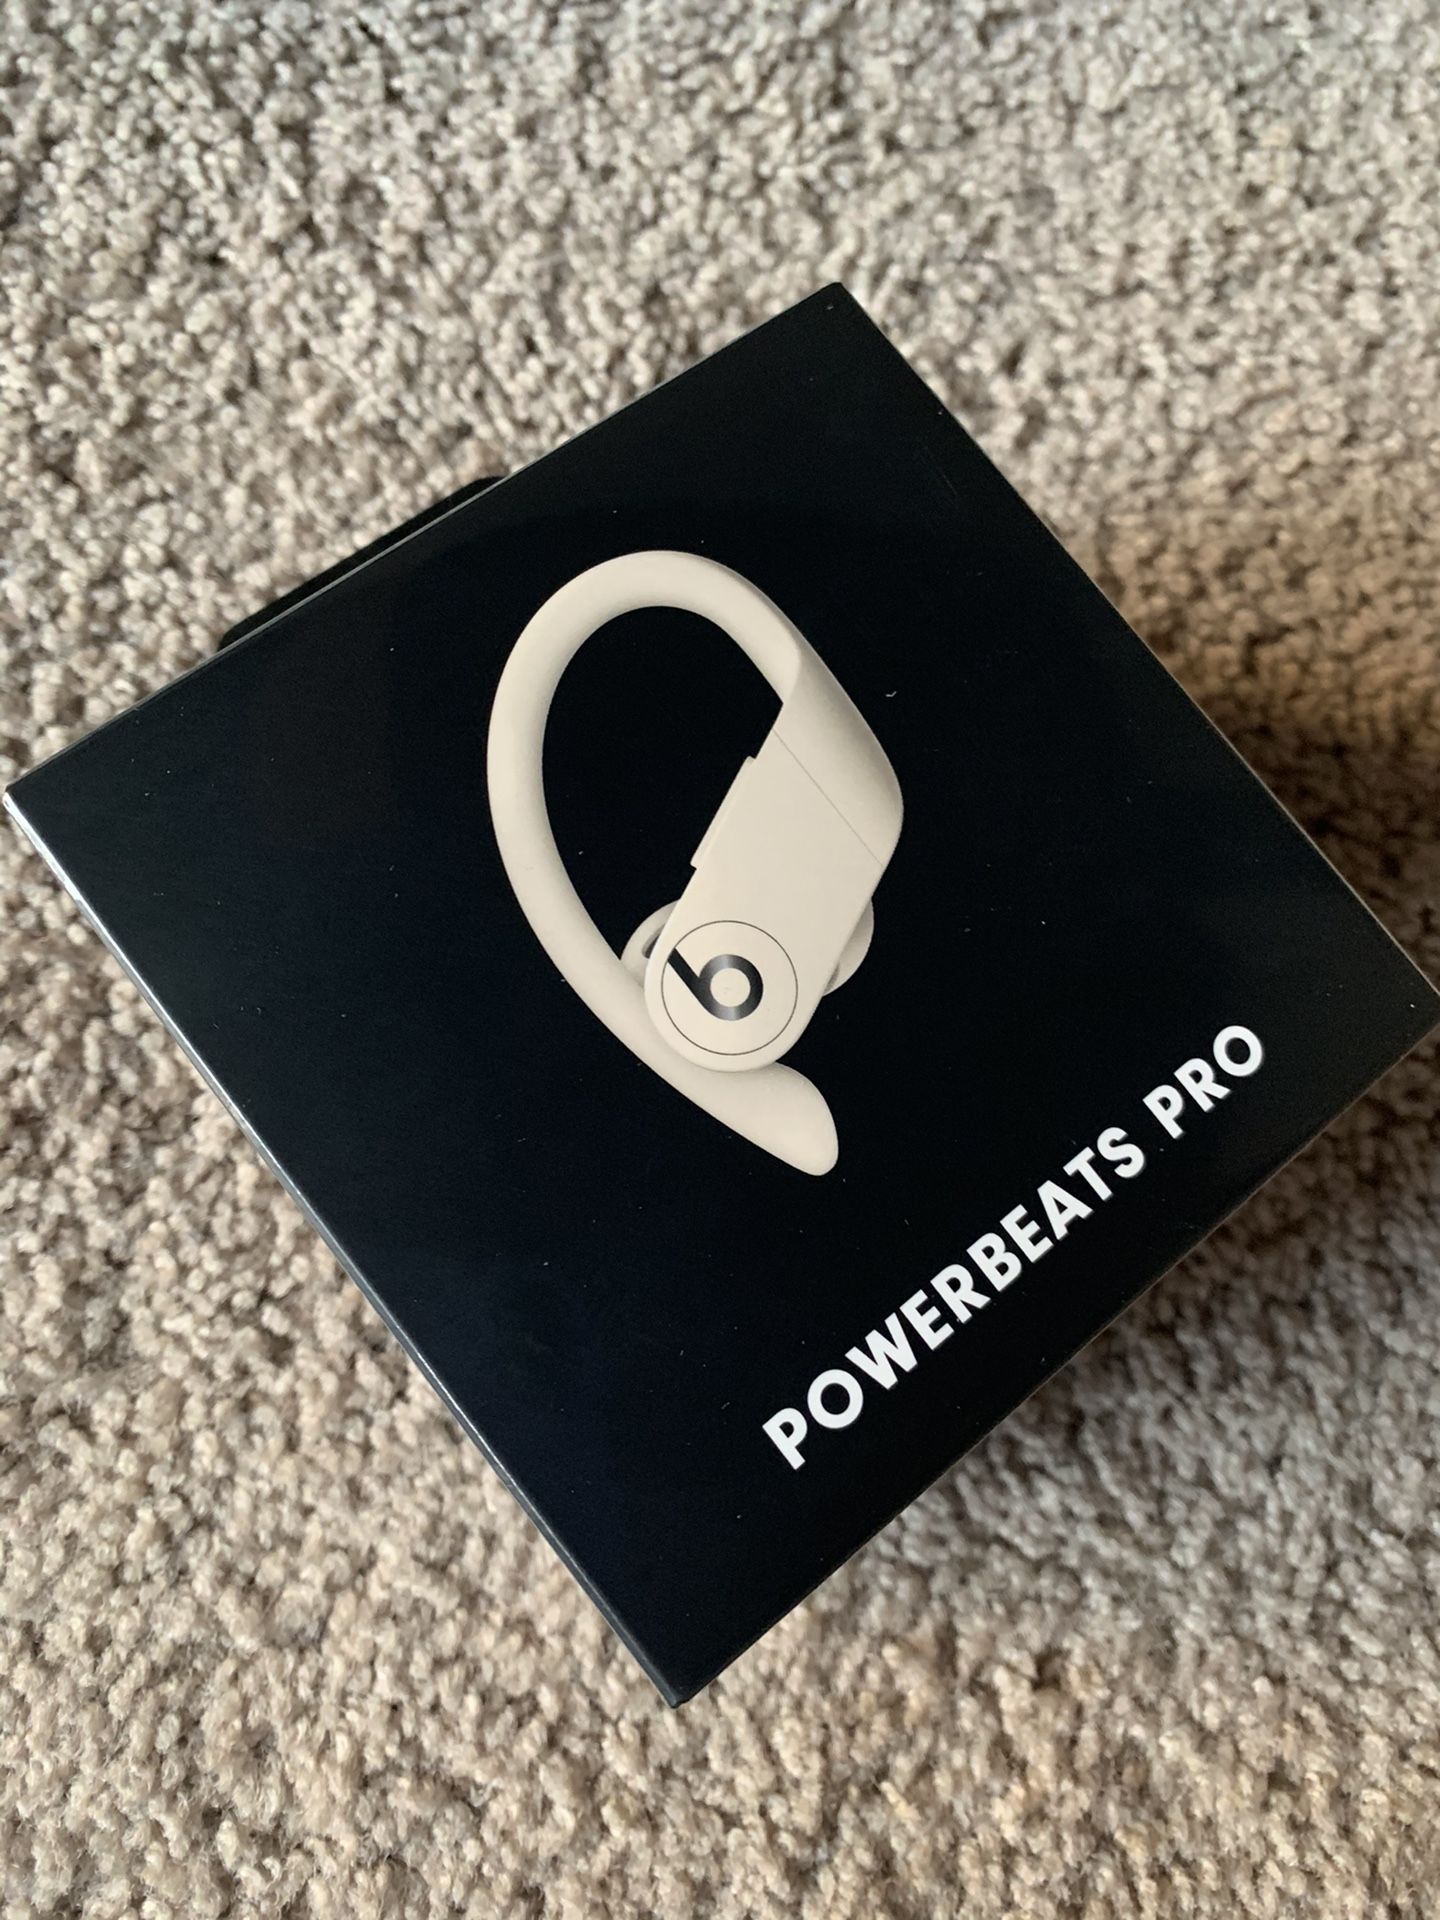 POWERBEATS PRO brand new authentic sealed box unopened still wrapped on it $130 Very FIRM FIRM NO TRADES